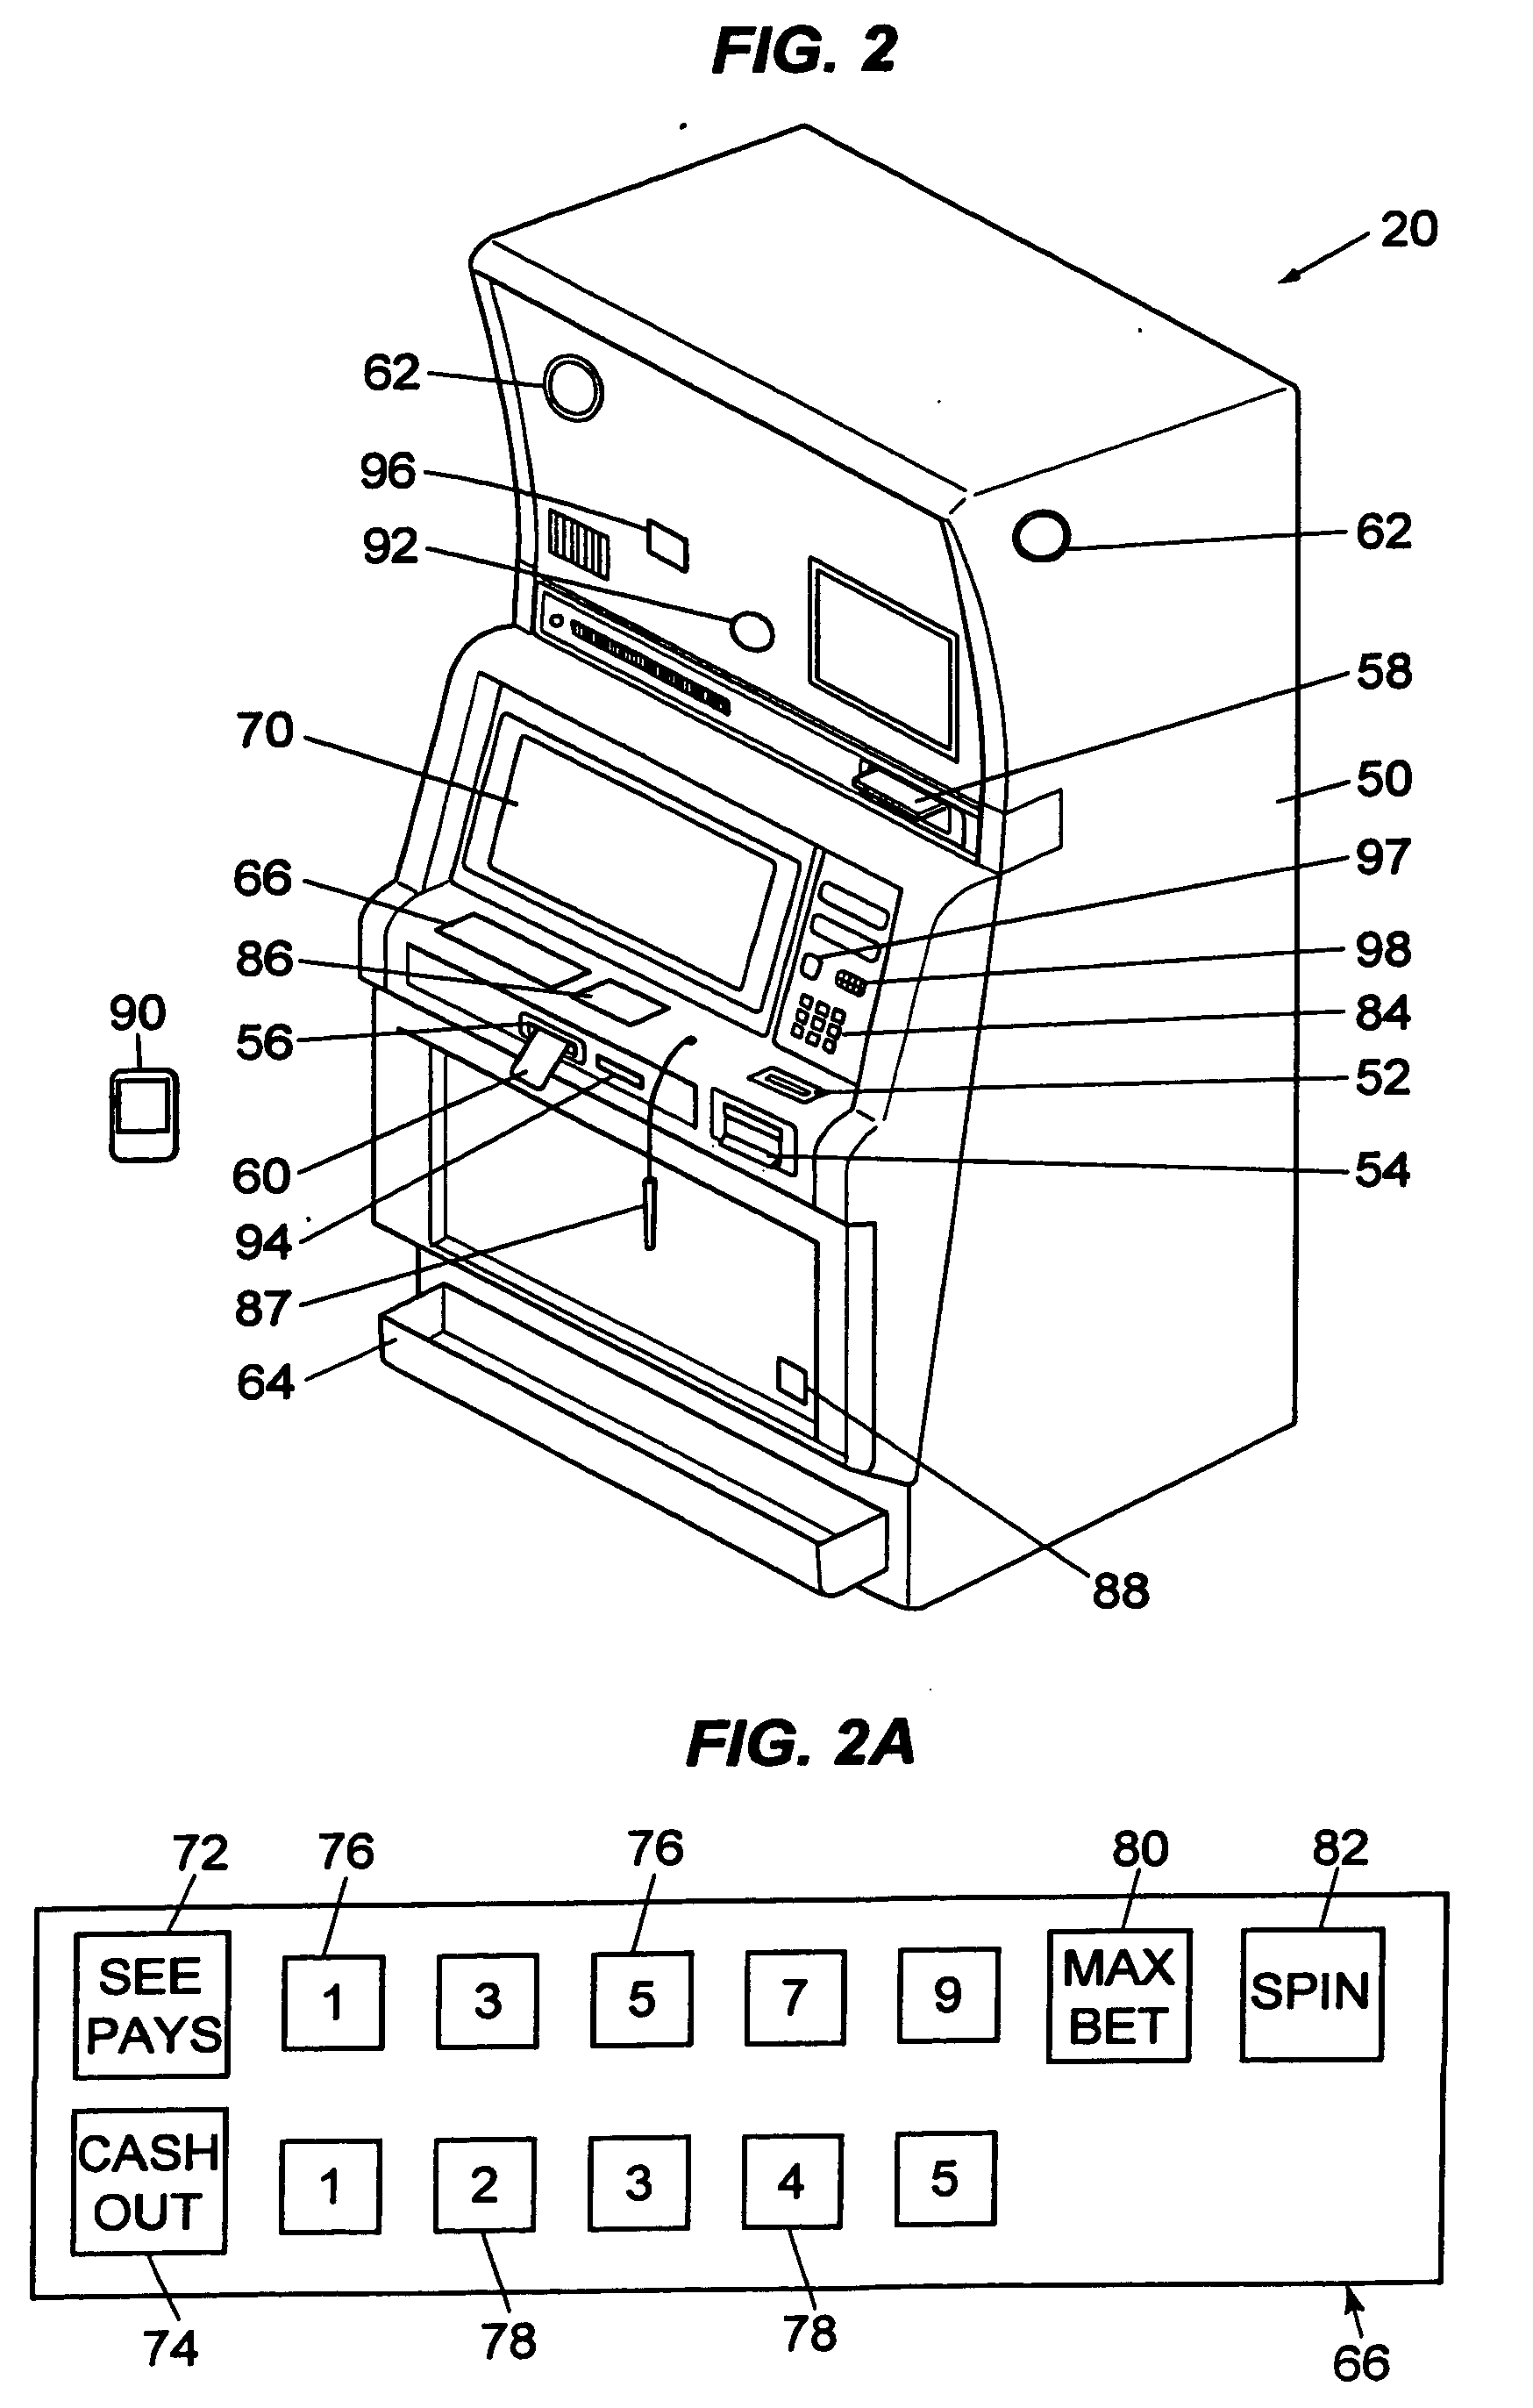 Method for distributing large payouts with minimal interruption of a gaming session